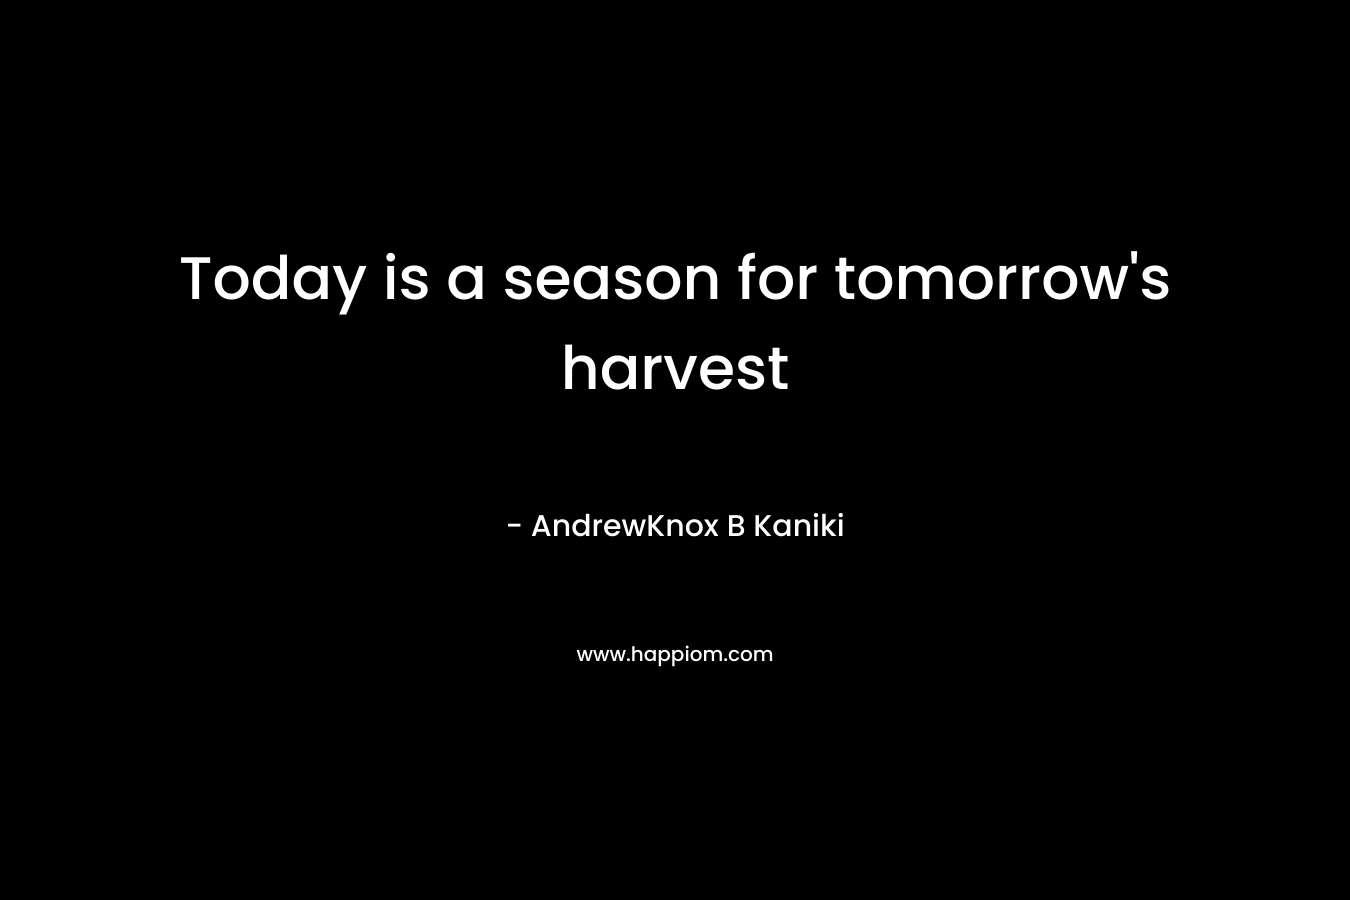 Today is a season for tomorrow's harvest